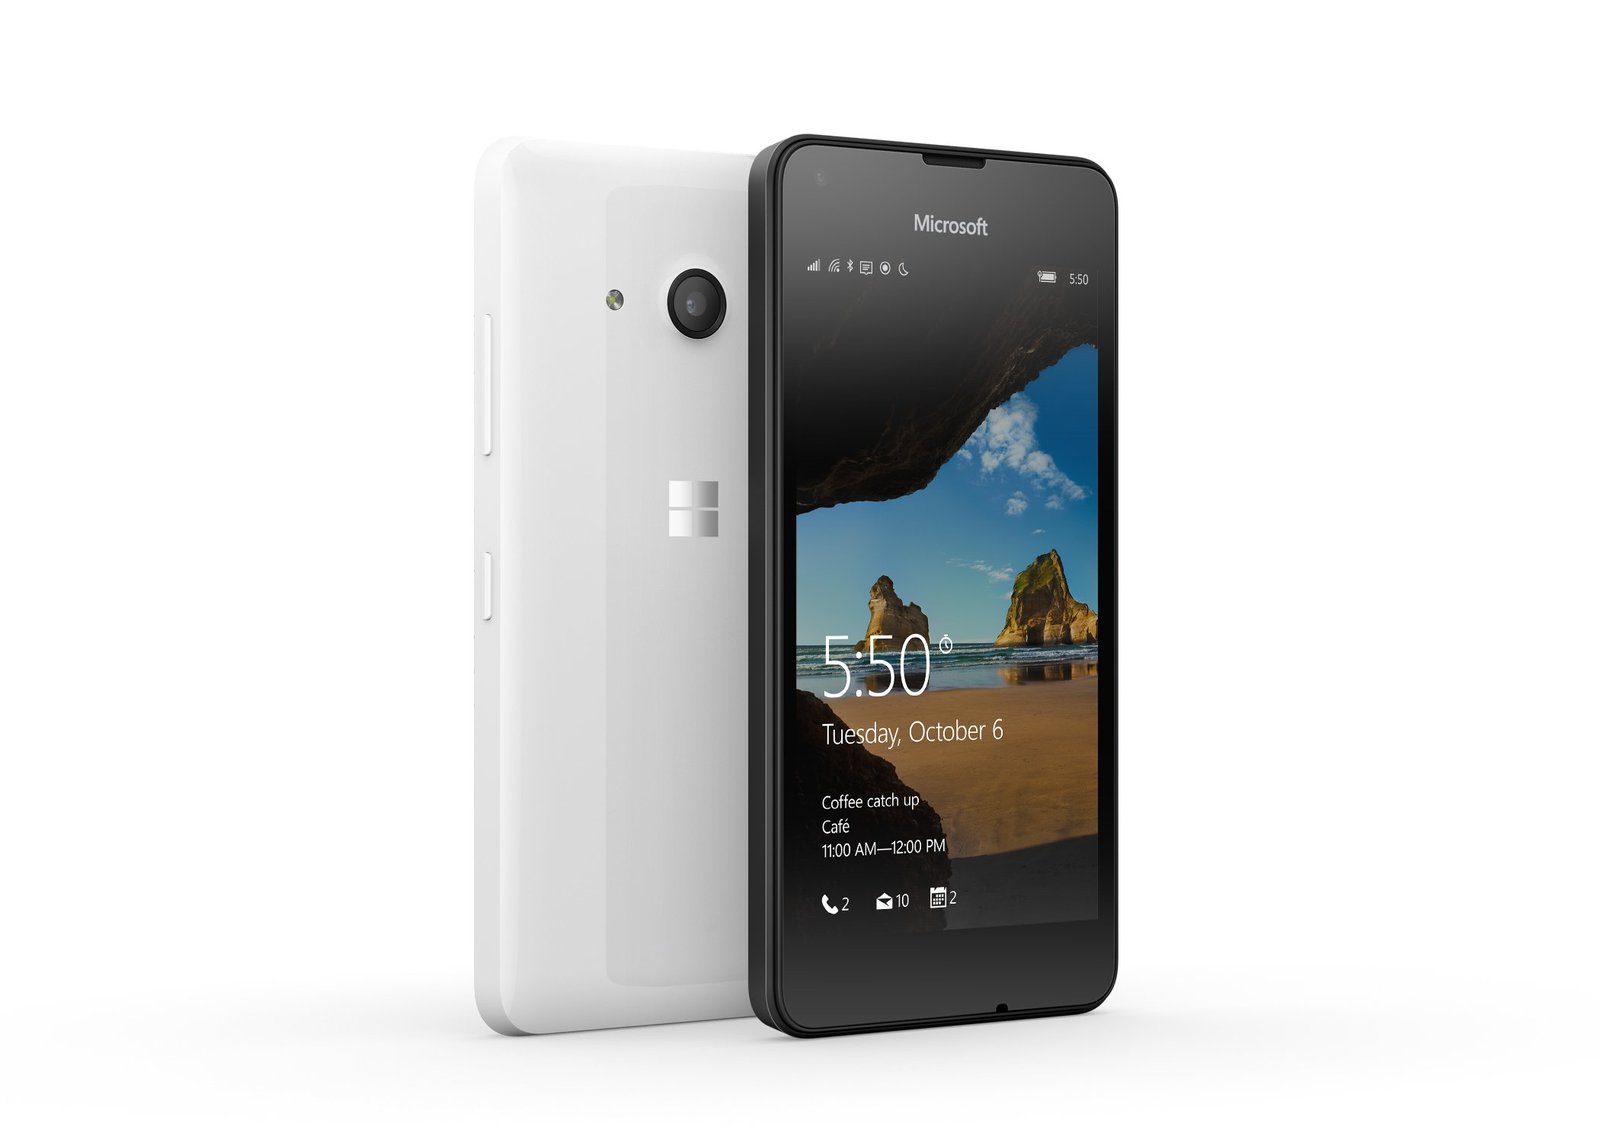 Microsoft Lumia 550 Windows 10 for mobile now available, priced at $139 USD